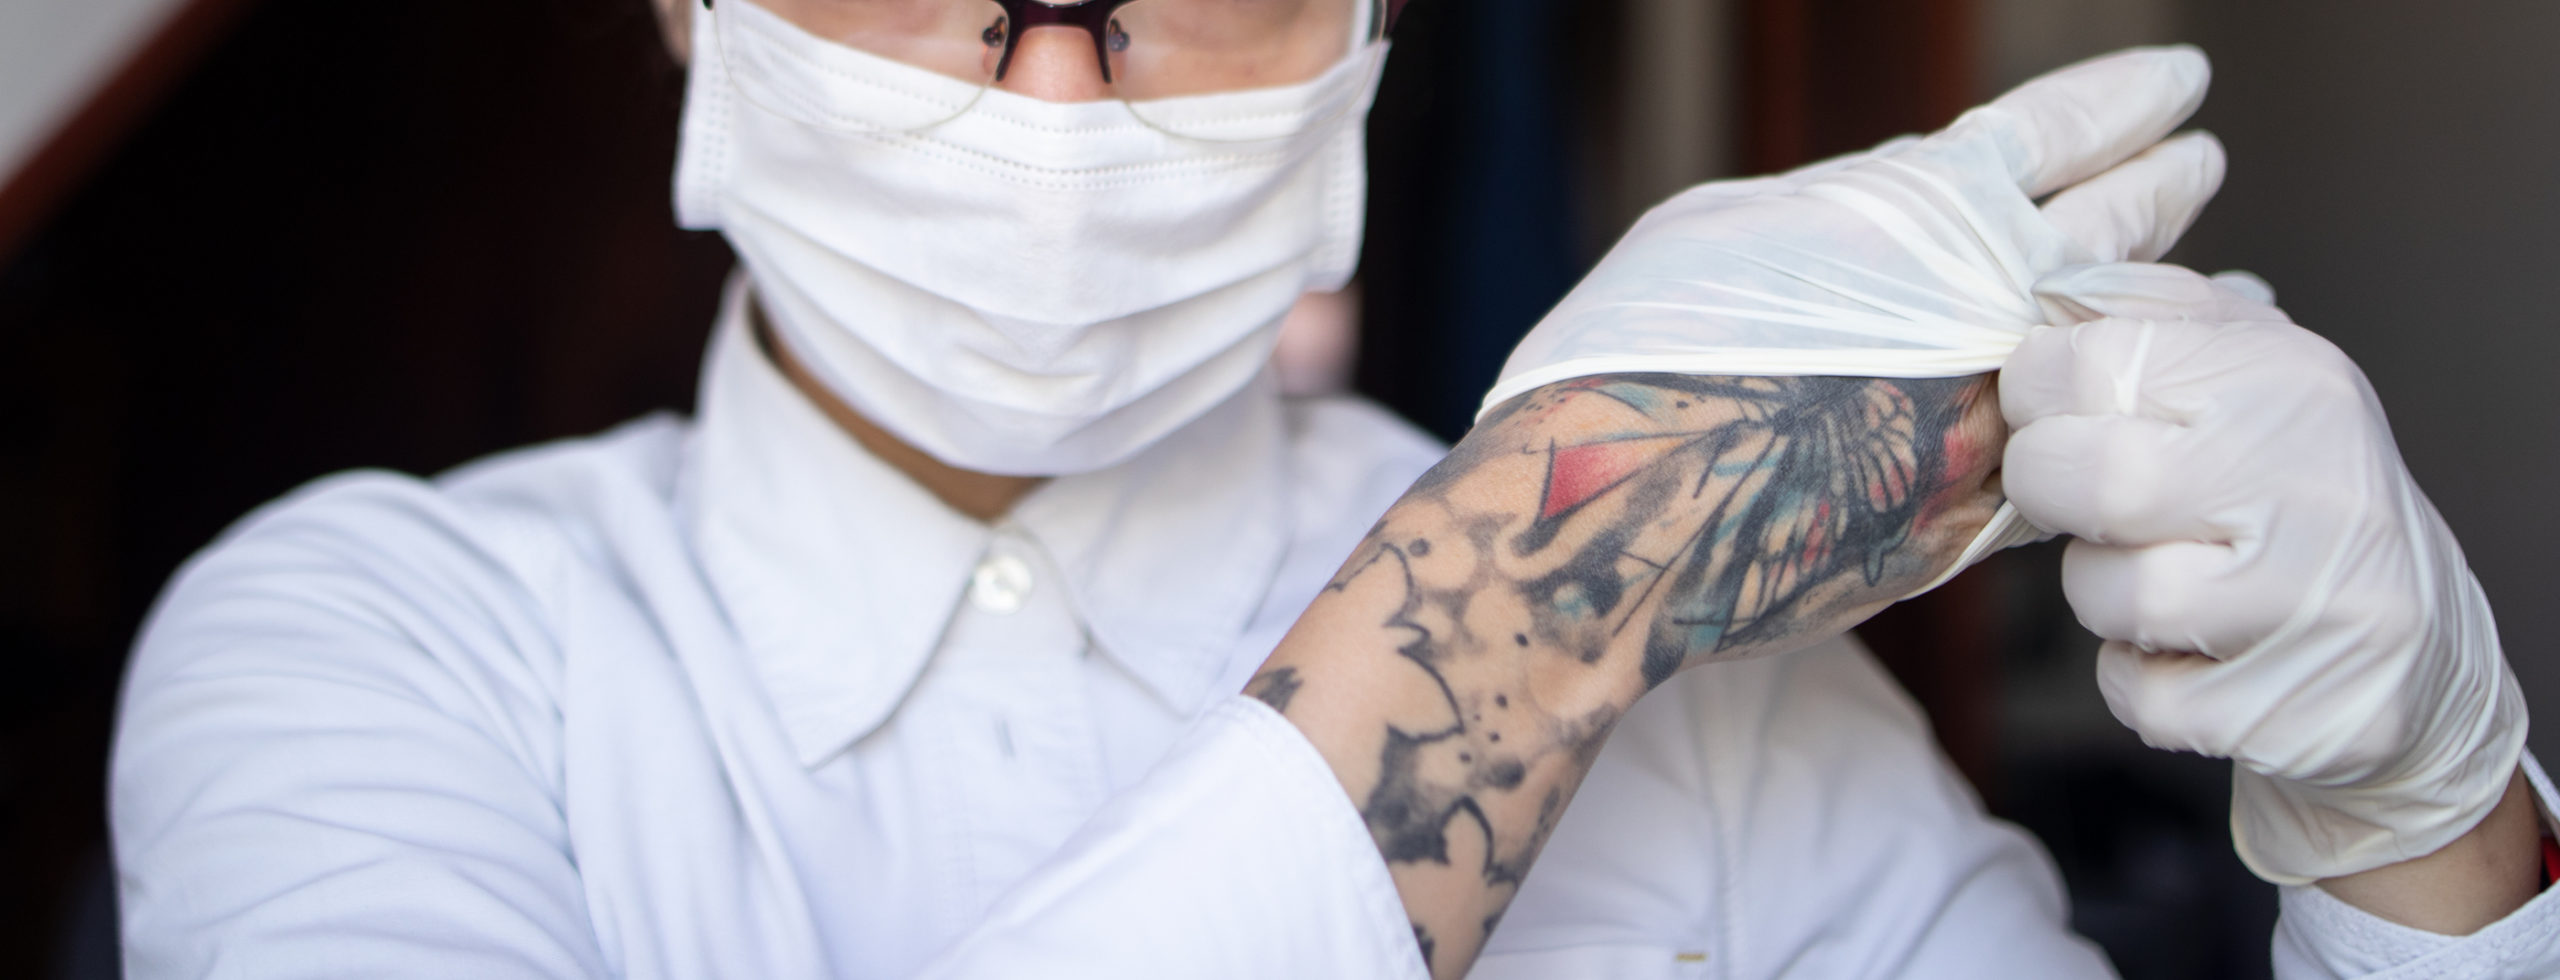 38 Beautiful Nurse Tattoos with Meaning - Our Mindful Life